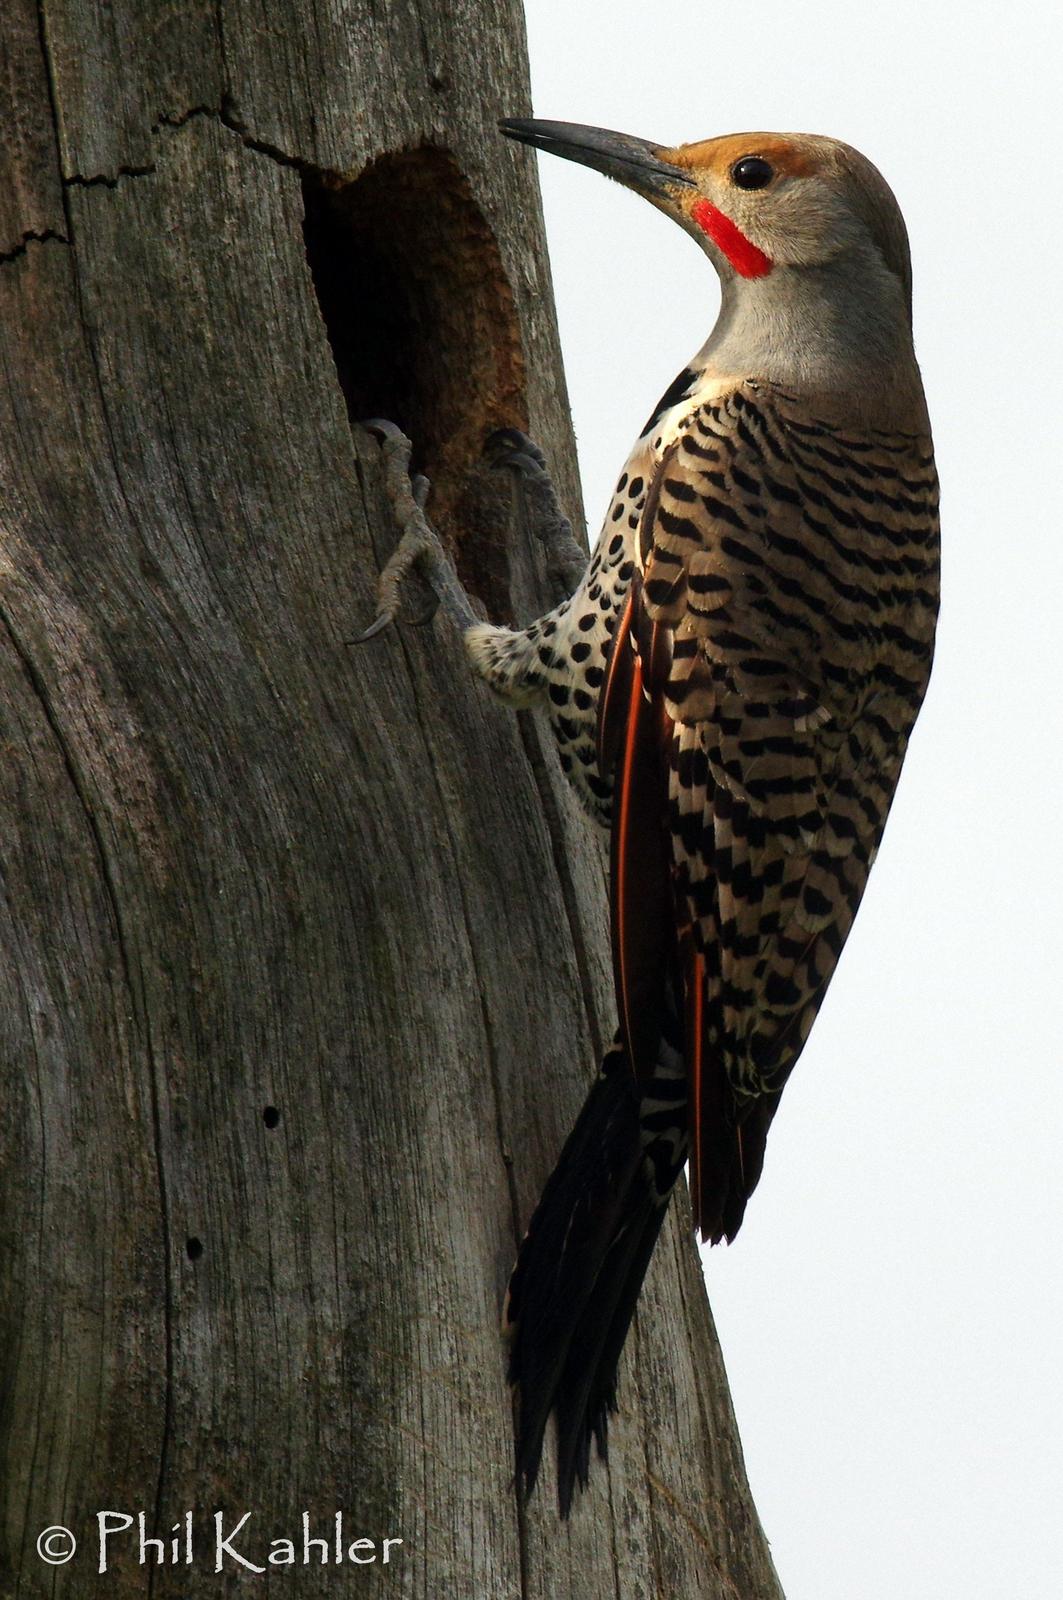 Northern Flicker (Red-shafted) Photo by Phil Kahler